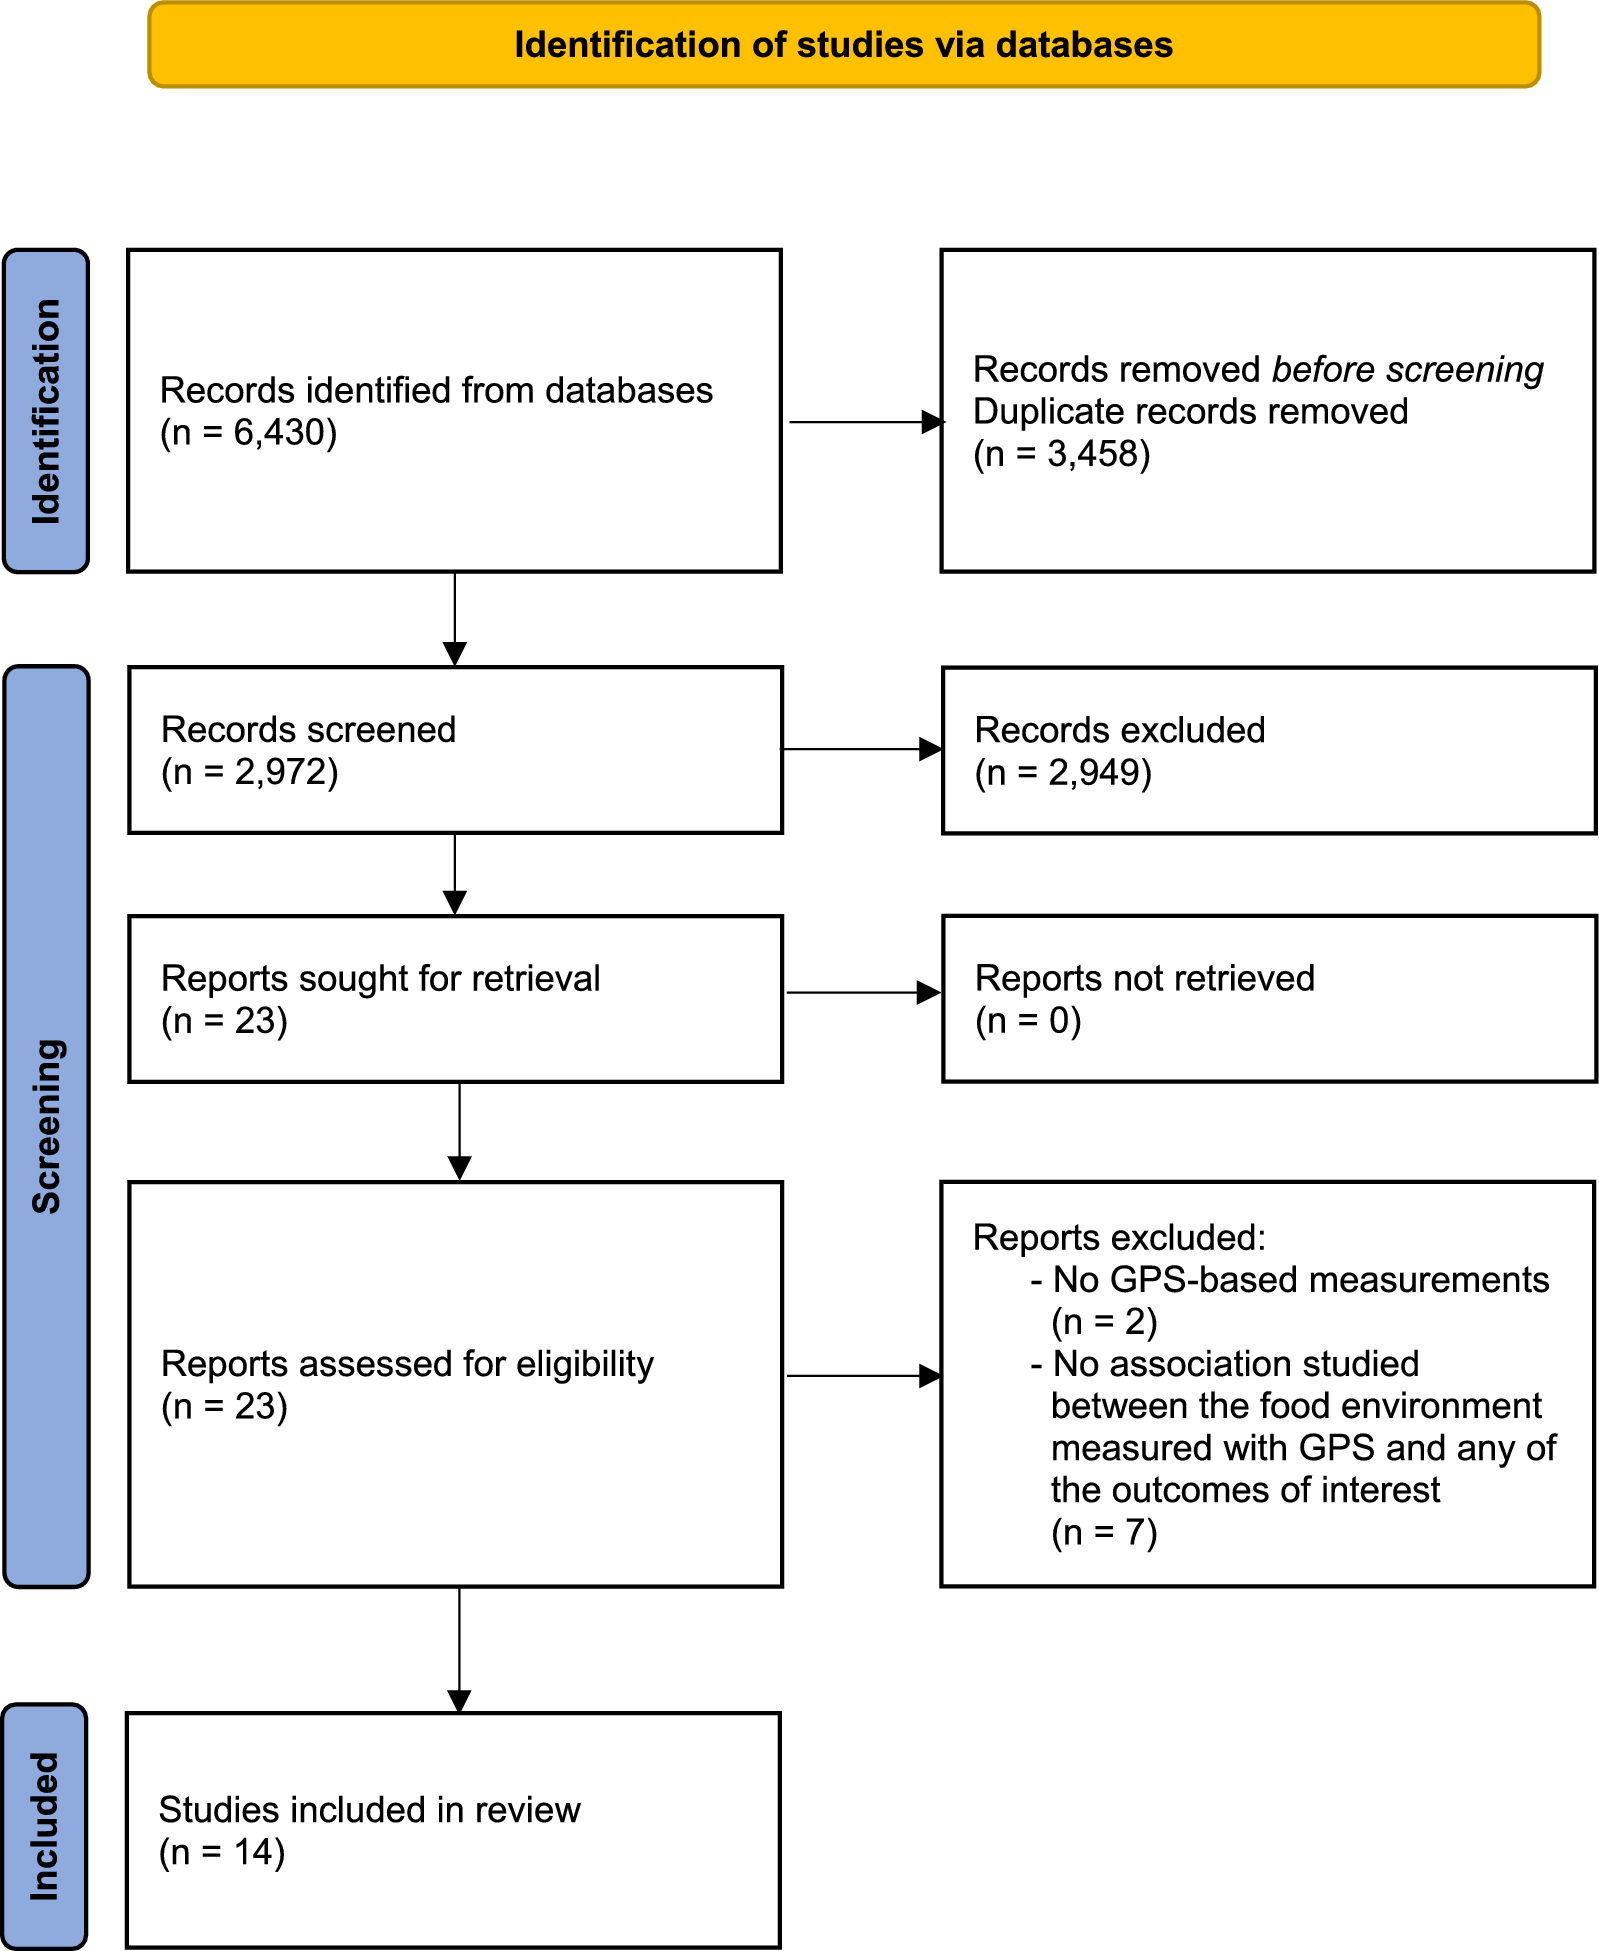 Global positioning system-based food environment exposures, diet-related, and cardiometabolic health outcomes: a systematic review and research agenda